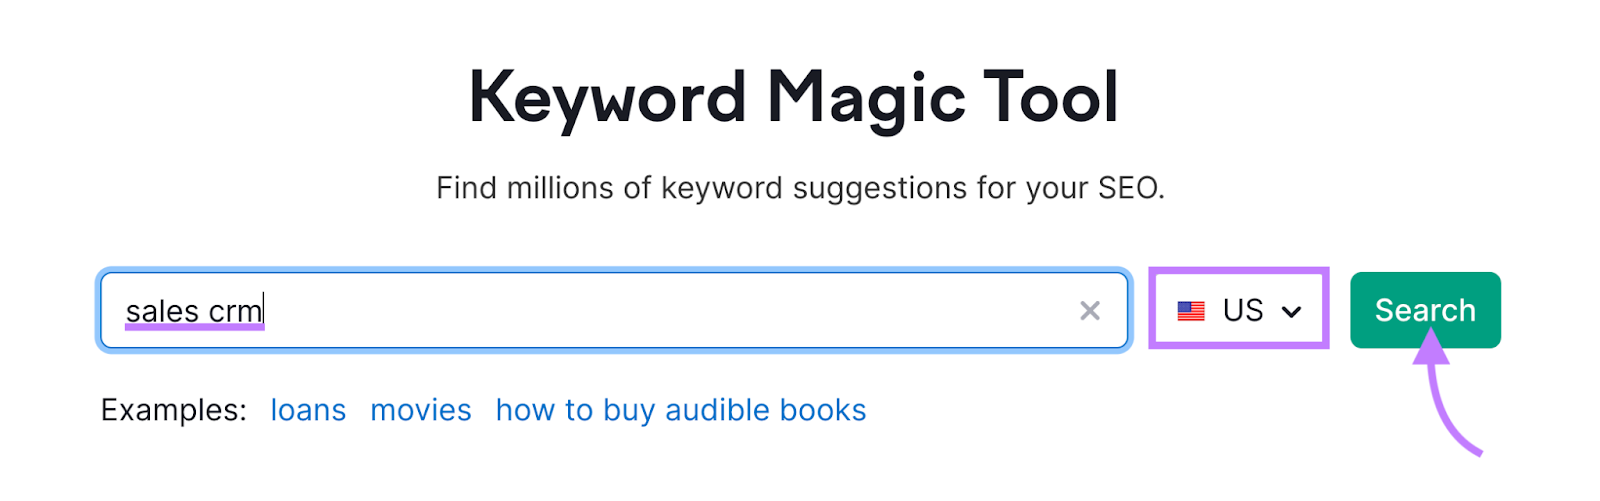 "sales crm" entered into the Keyword Magic Tool search bar